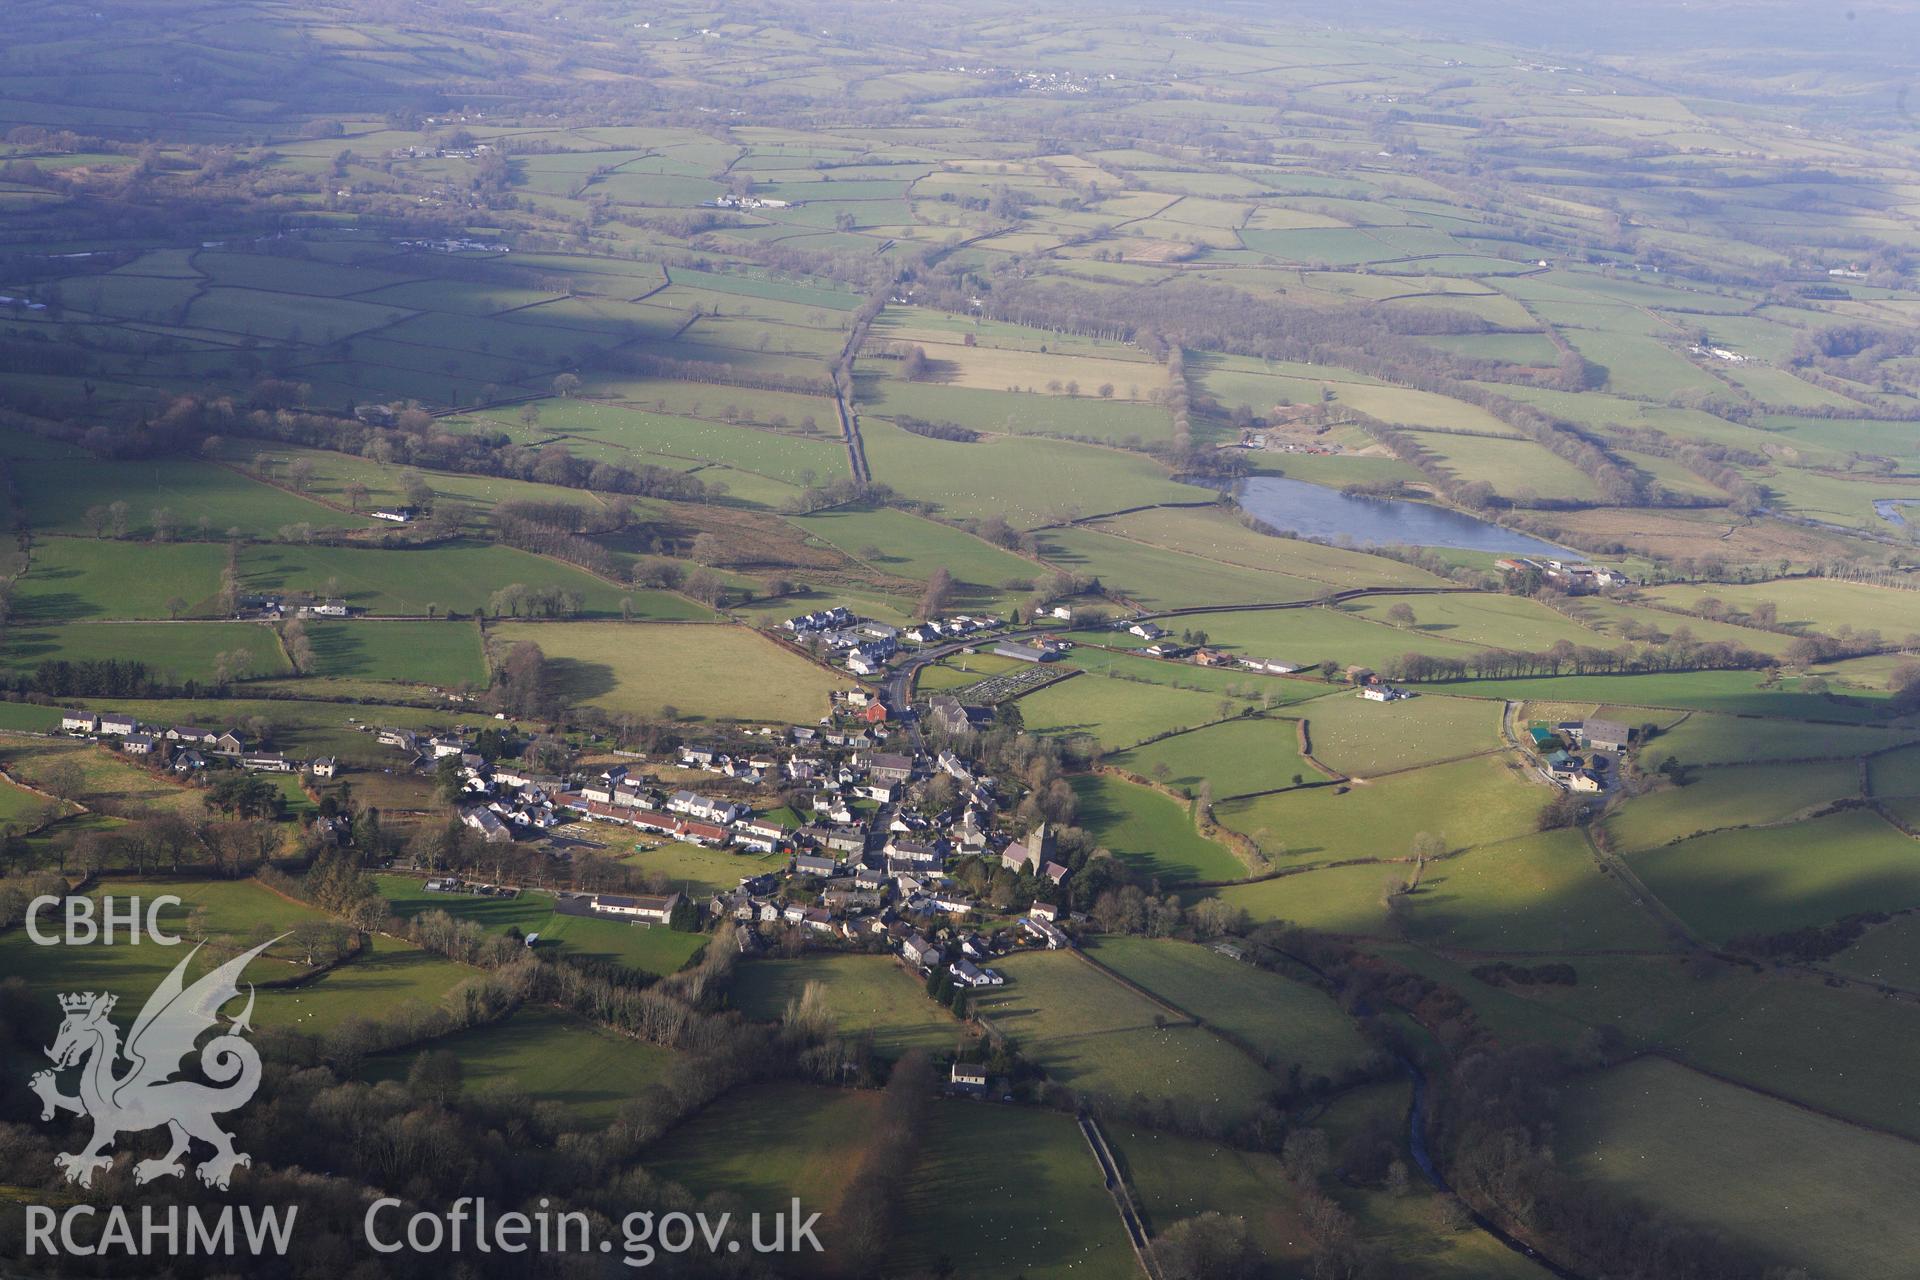 RCAHMW colour oblique photograph of Llanddewi Brefi, View from South. Taken by Toby Driver on 07/02/2012.